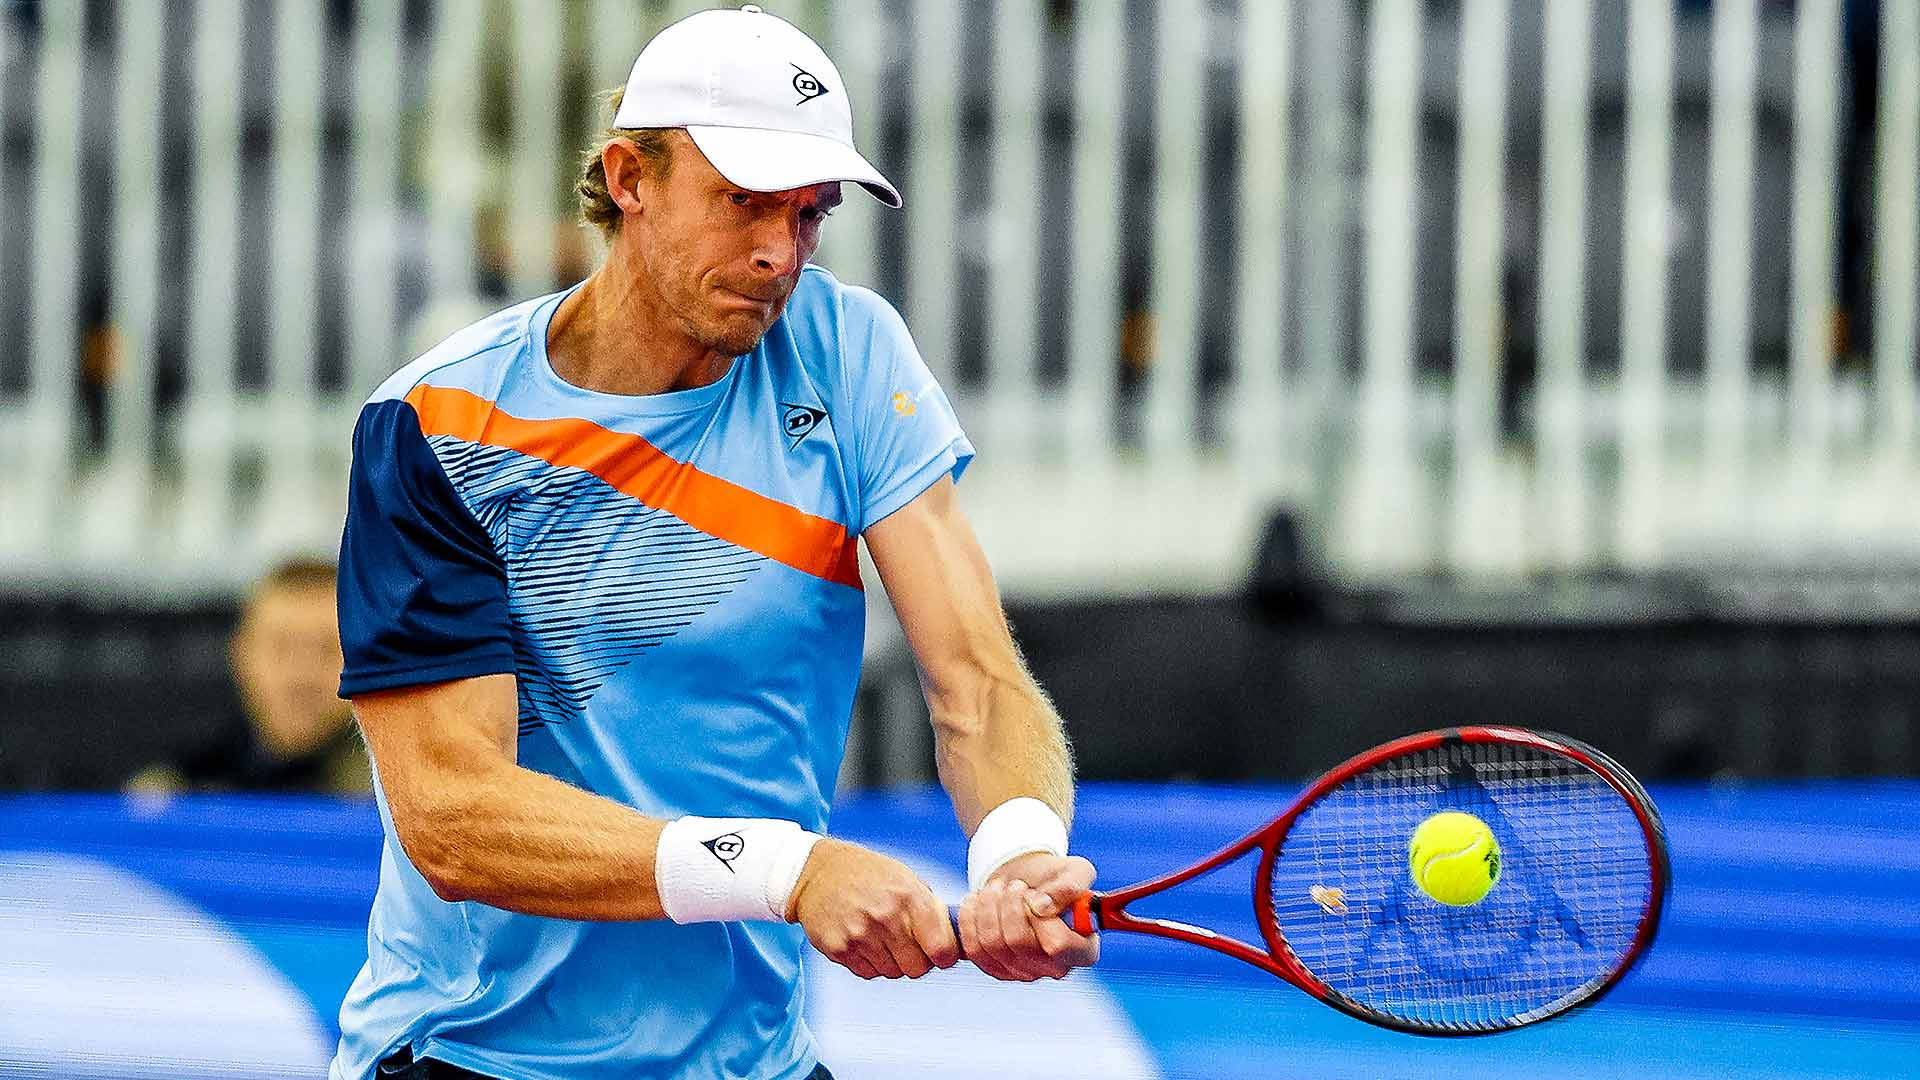 Kevin Anderson in Action During a Tennis Match Wallpaper